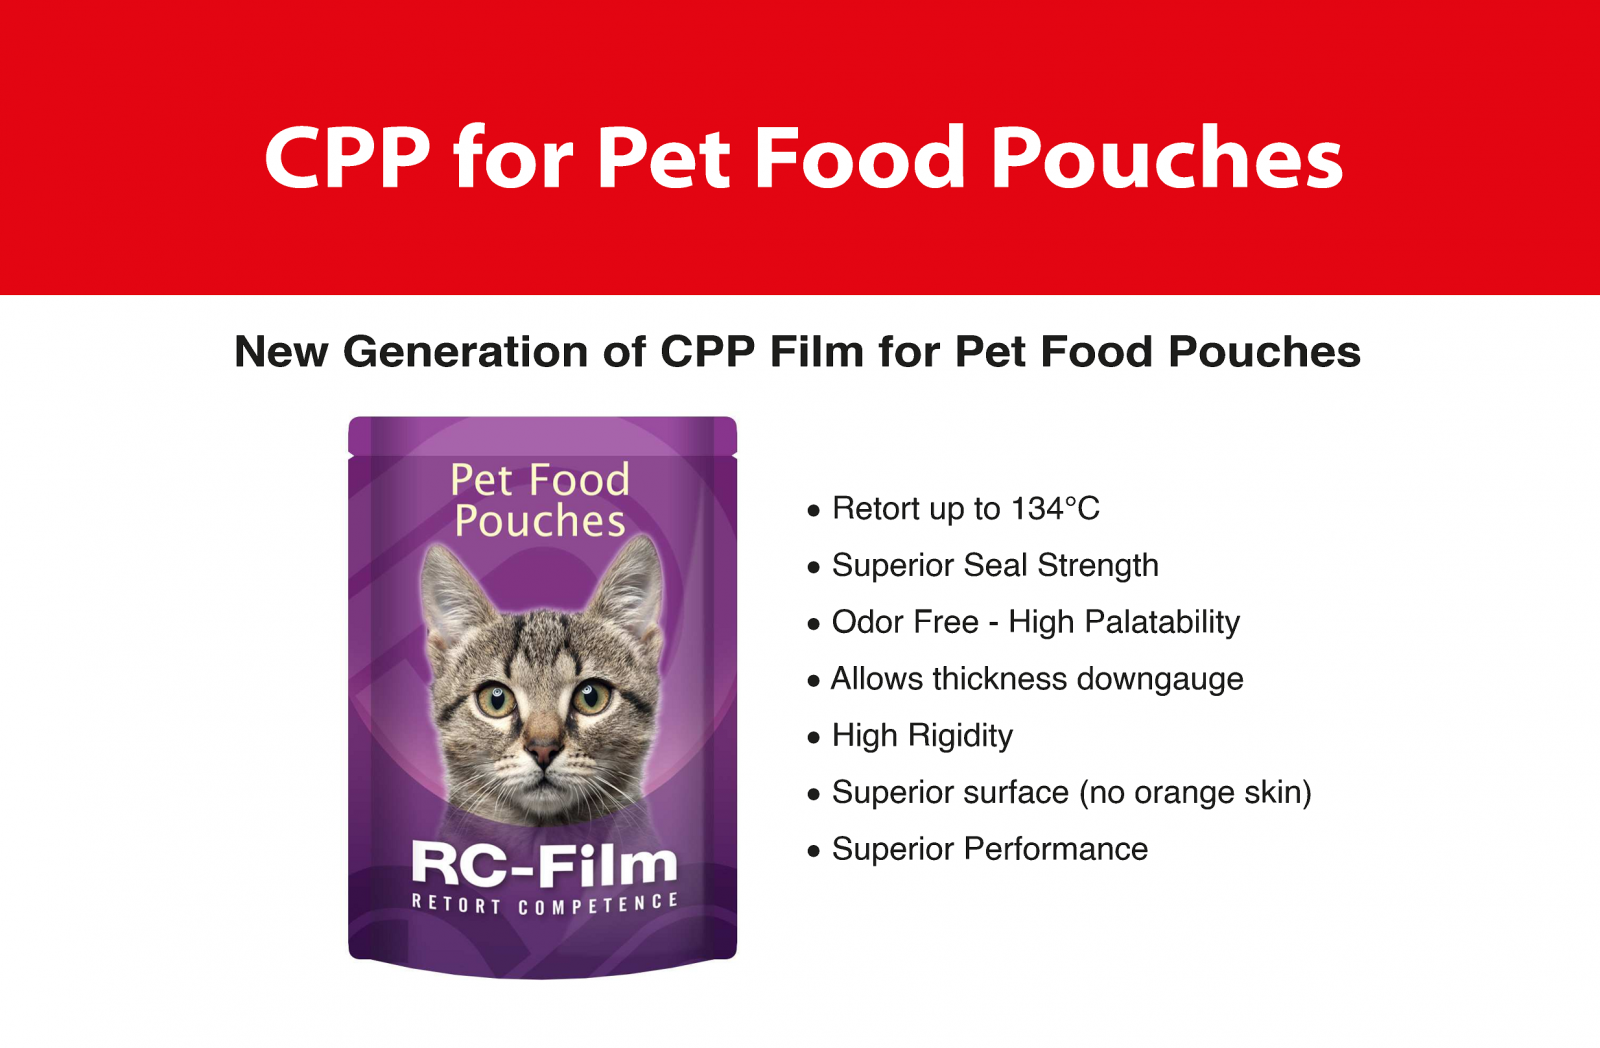 CPP_for_Pet_Food_Pouches_RCH-53